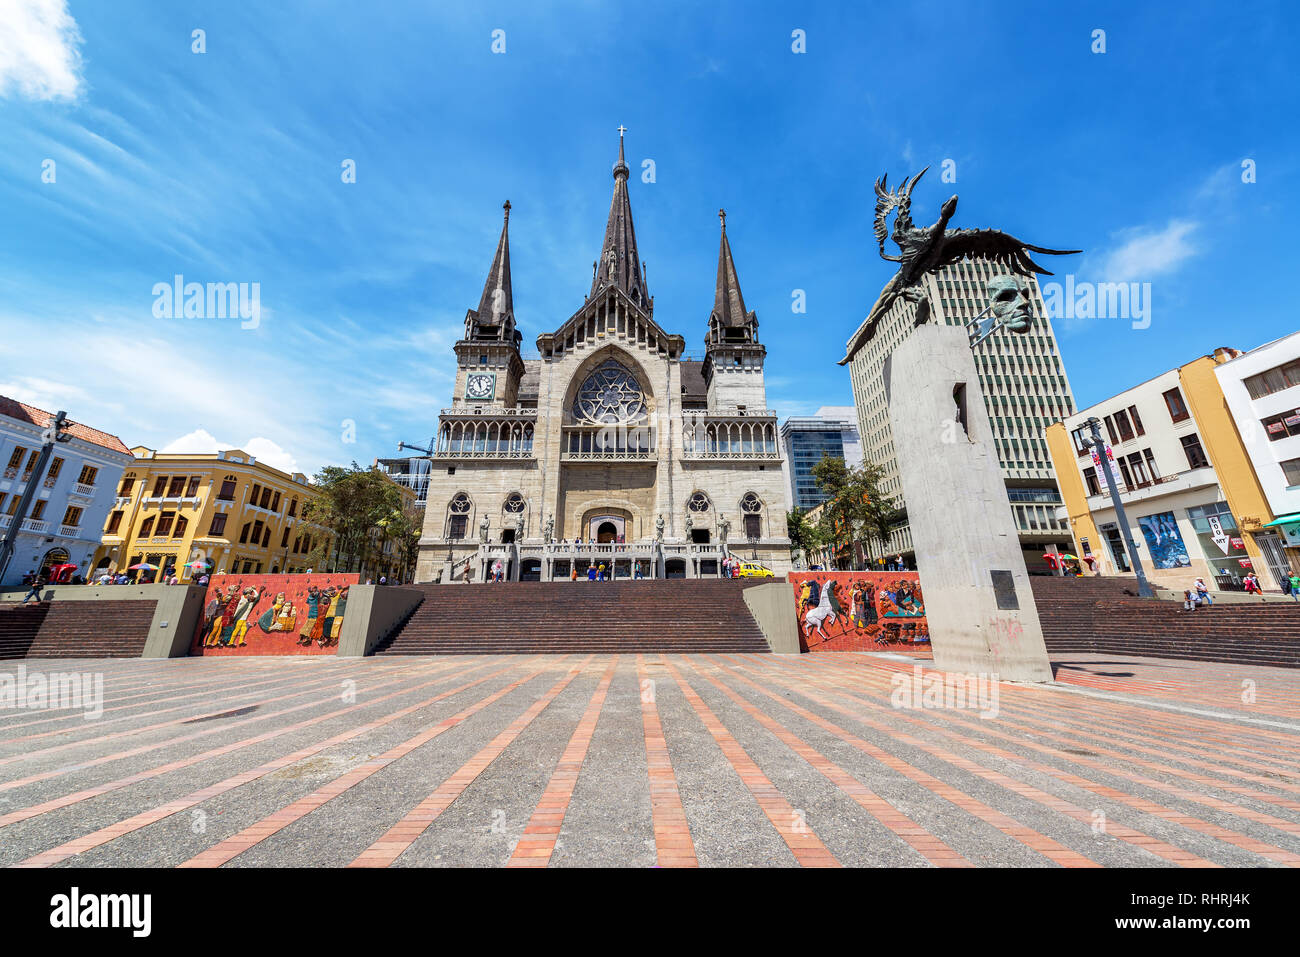 MANIZALES, COLOMBIA - MAY 30: Plaza de Bolivar and Our Lady of Rosary cathedral in Manizales, Colombia on May 30, 2016 Stock Photo